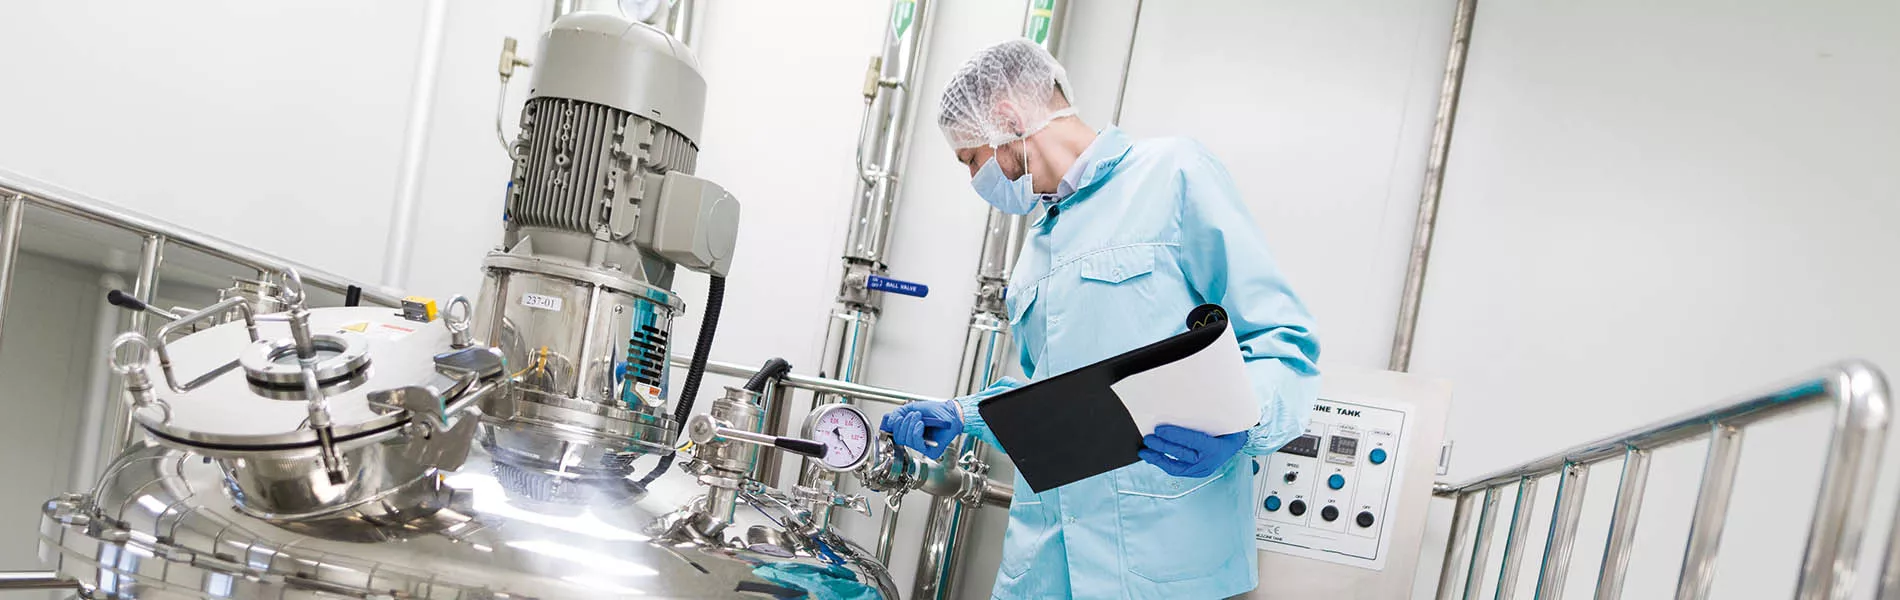 Engineer's Role in the Biopharmaceutical Supply Chain